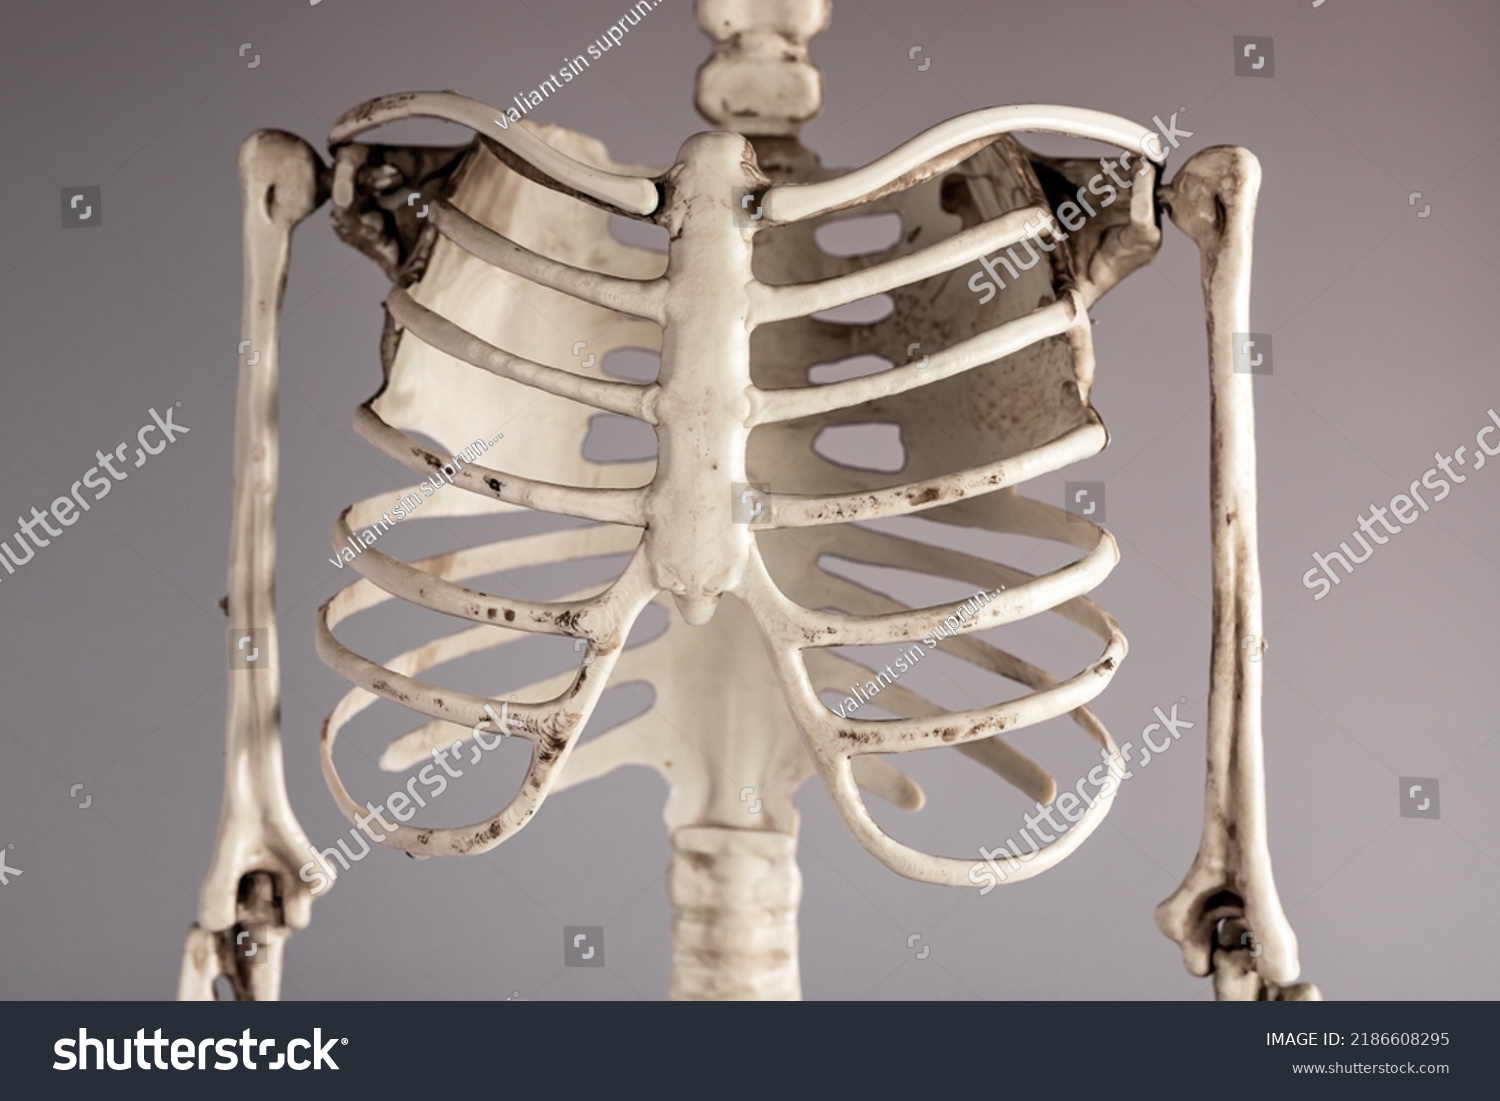 Human skeleton chest bones. Rib cage, spine. Skeletal system anatomy, body structure, medical education concept. High quality photo #2186608295